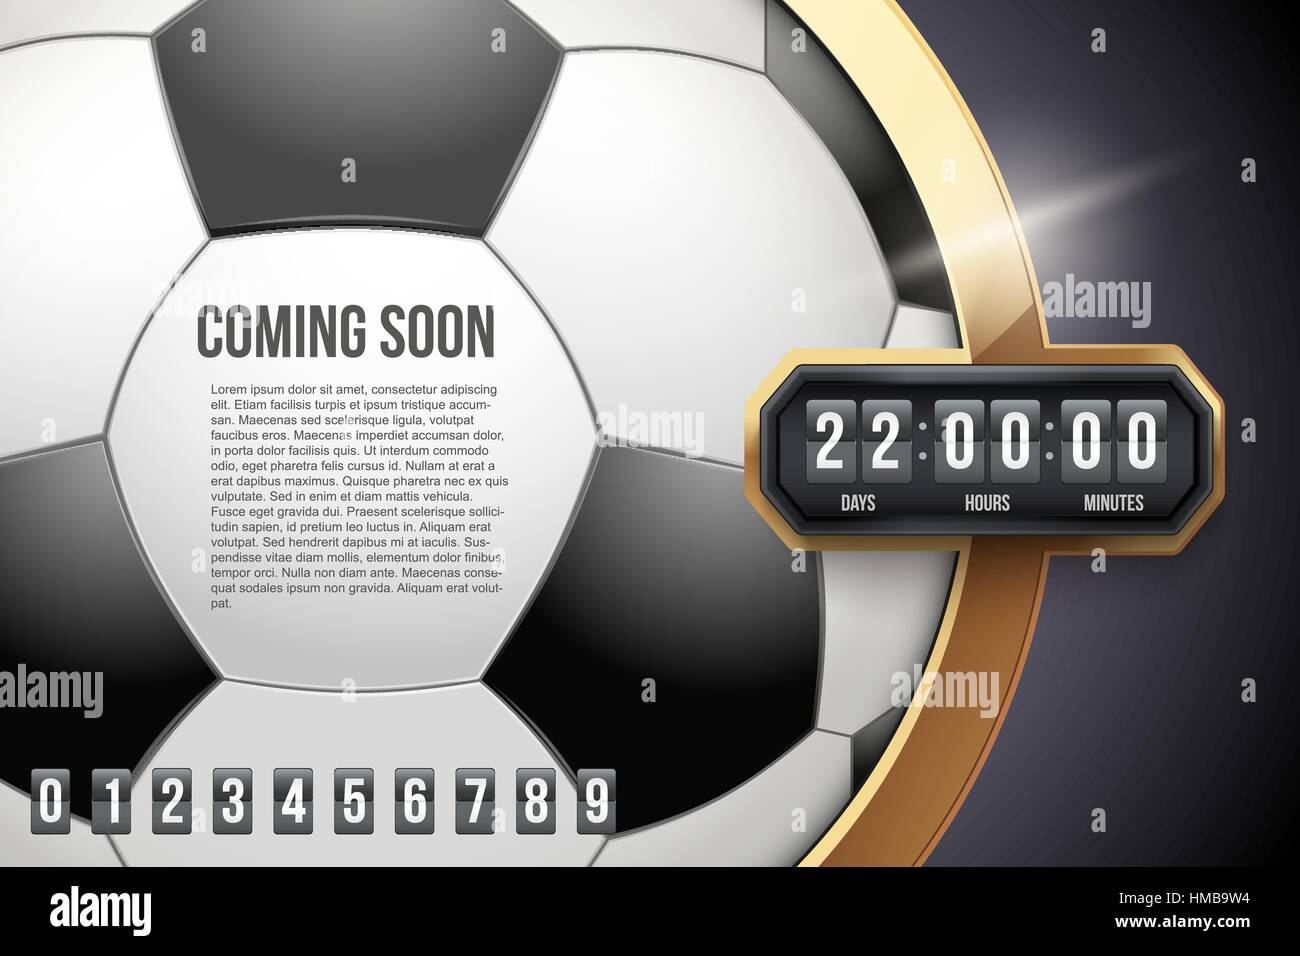 Fußball-Coming Soon und Countdown-Timer. Stock Vektor